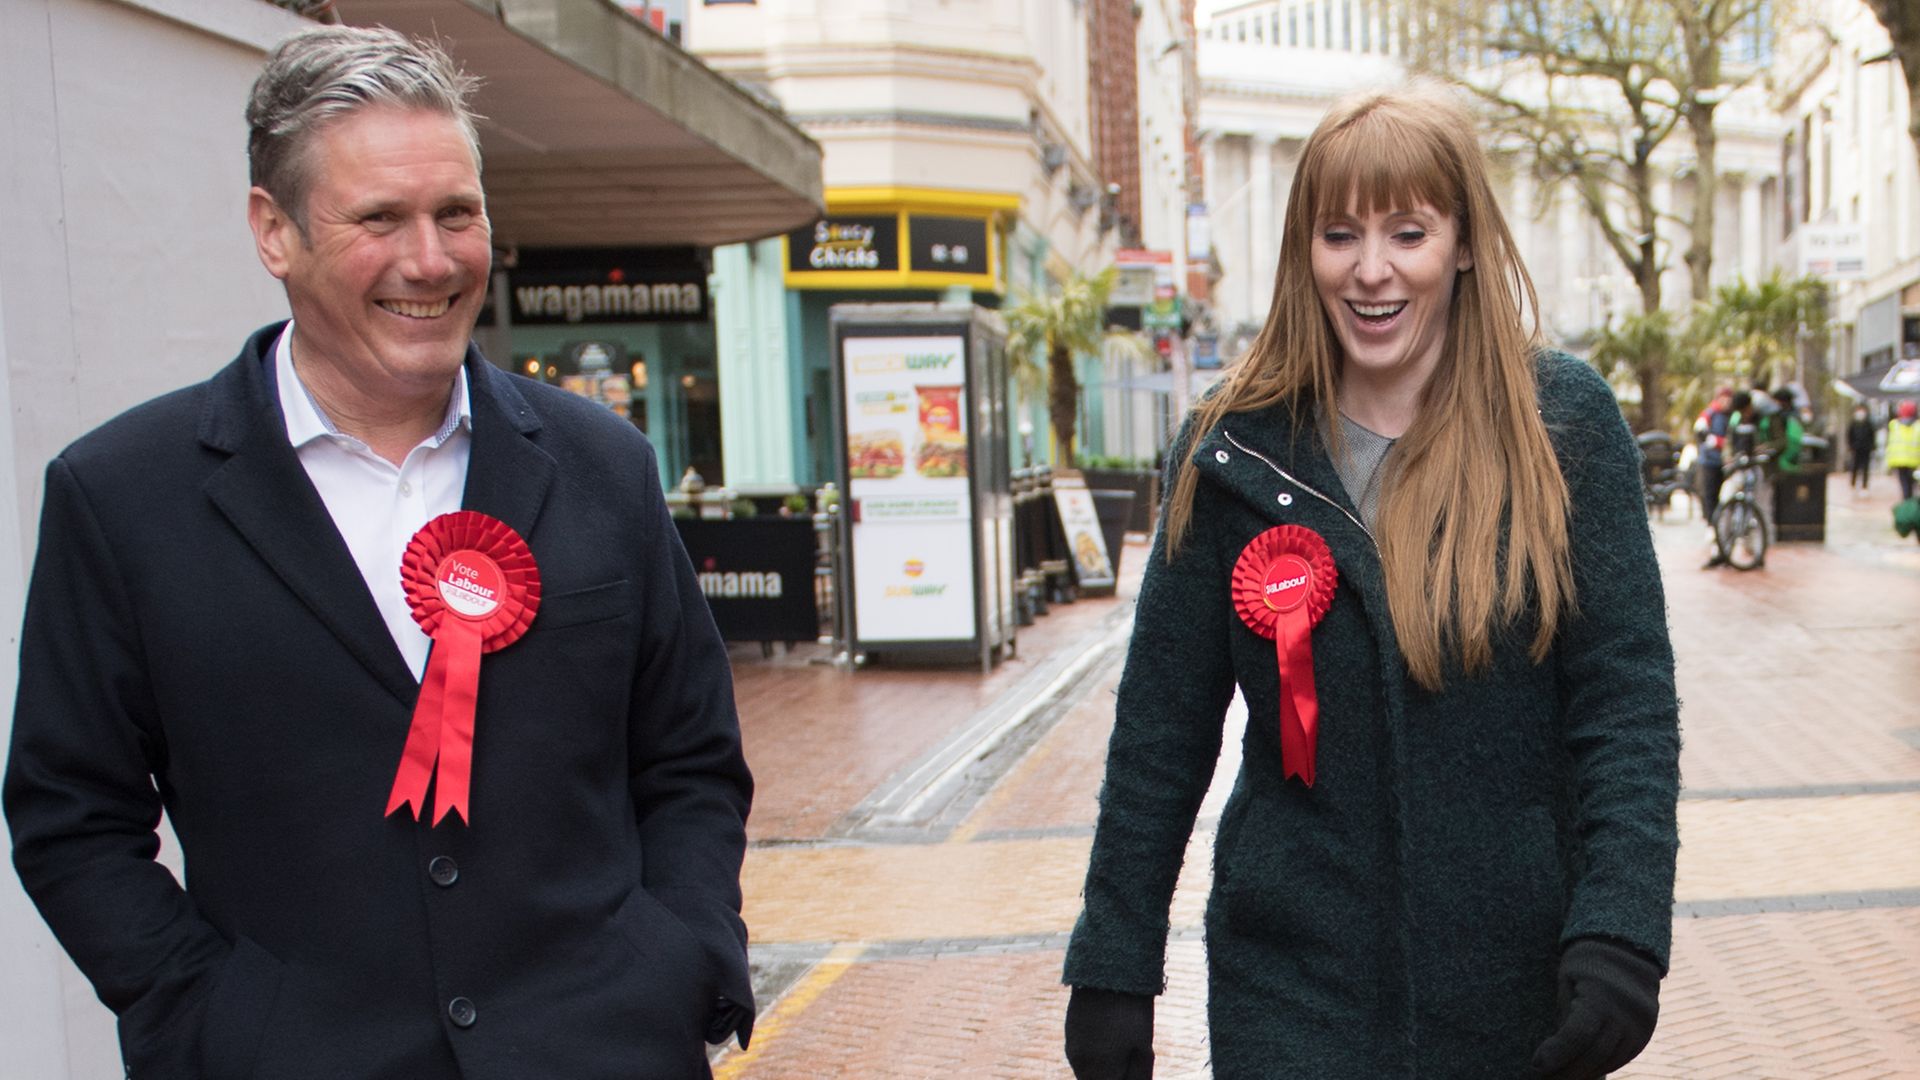 Leader of the Labour Party Sir Keir Starmer (far left) with Deputy Leader, Angela Rayner - Credit: PA